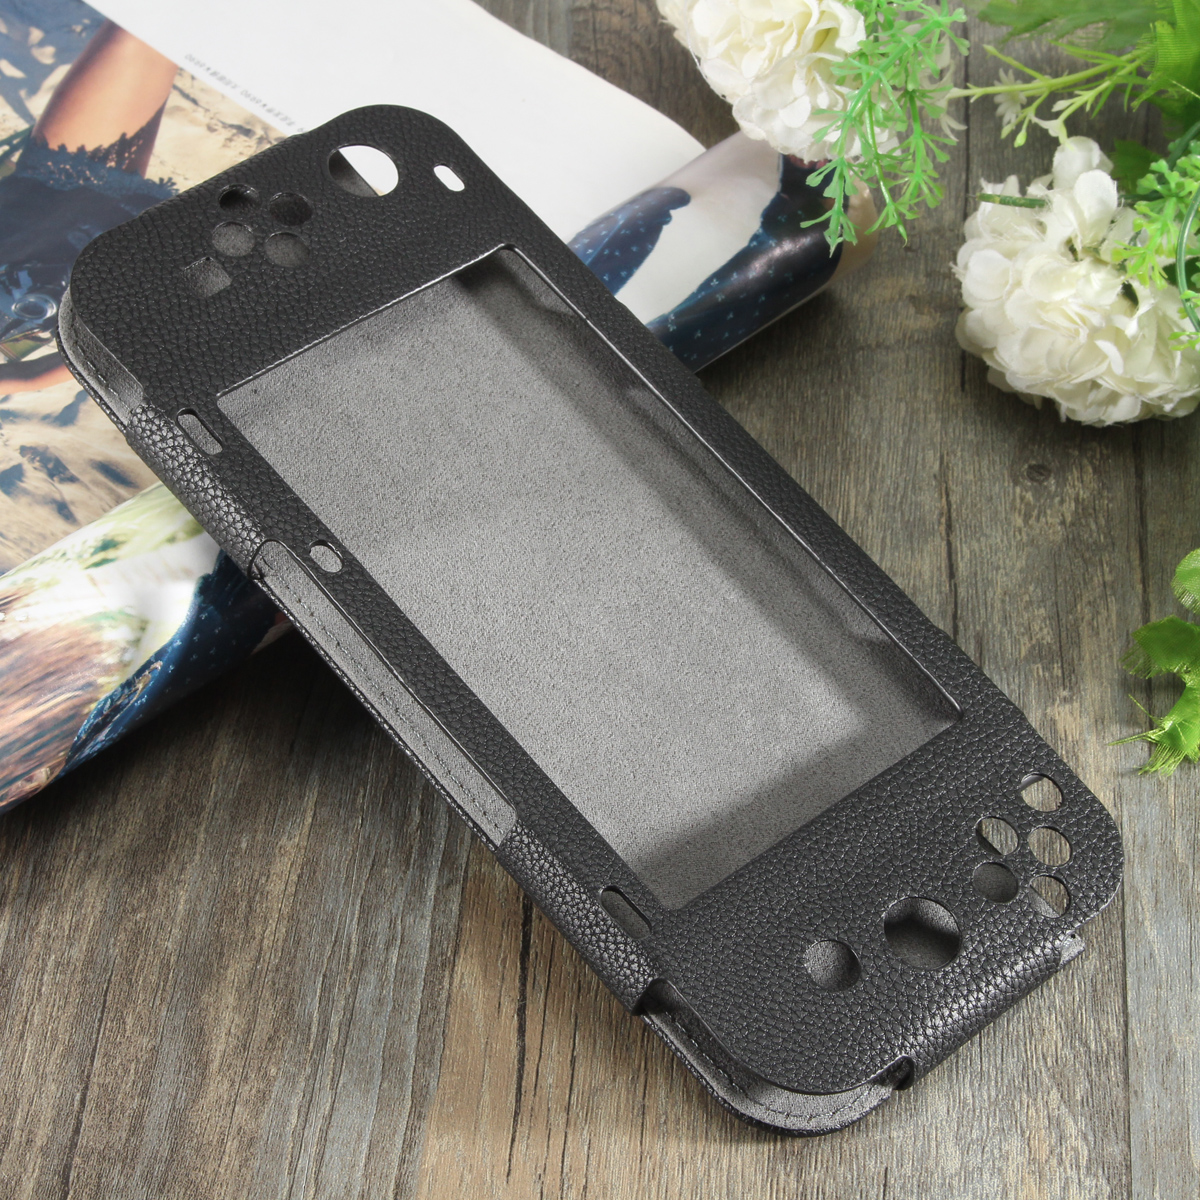 Leather-Protective-Case-Cover-Protecor-for-Nintendo-Switch-Game-Console-1540488-1